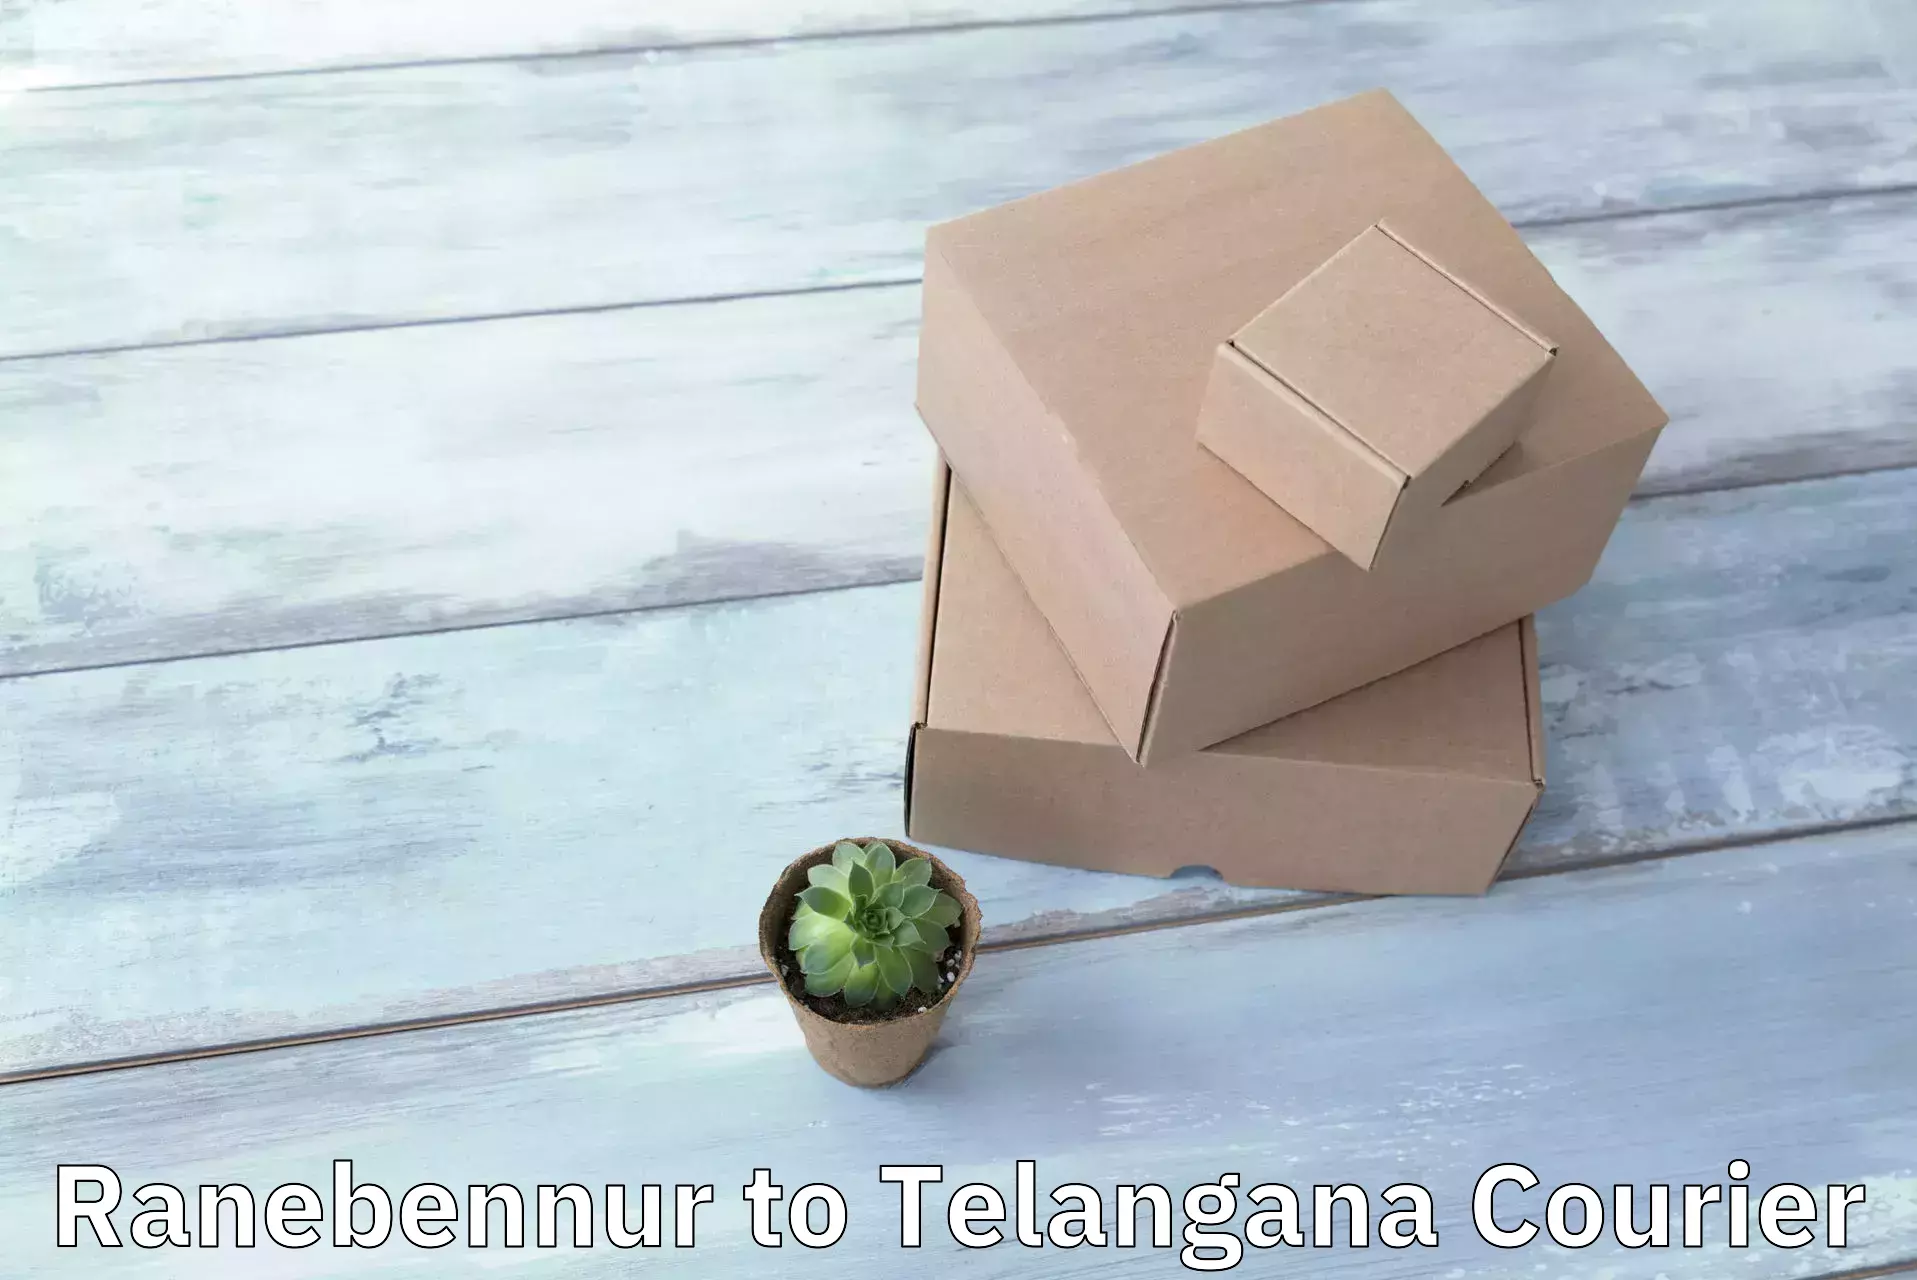 State-of-the-art courier technology Ranebennur to Khairatabad